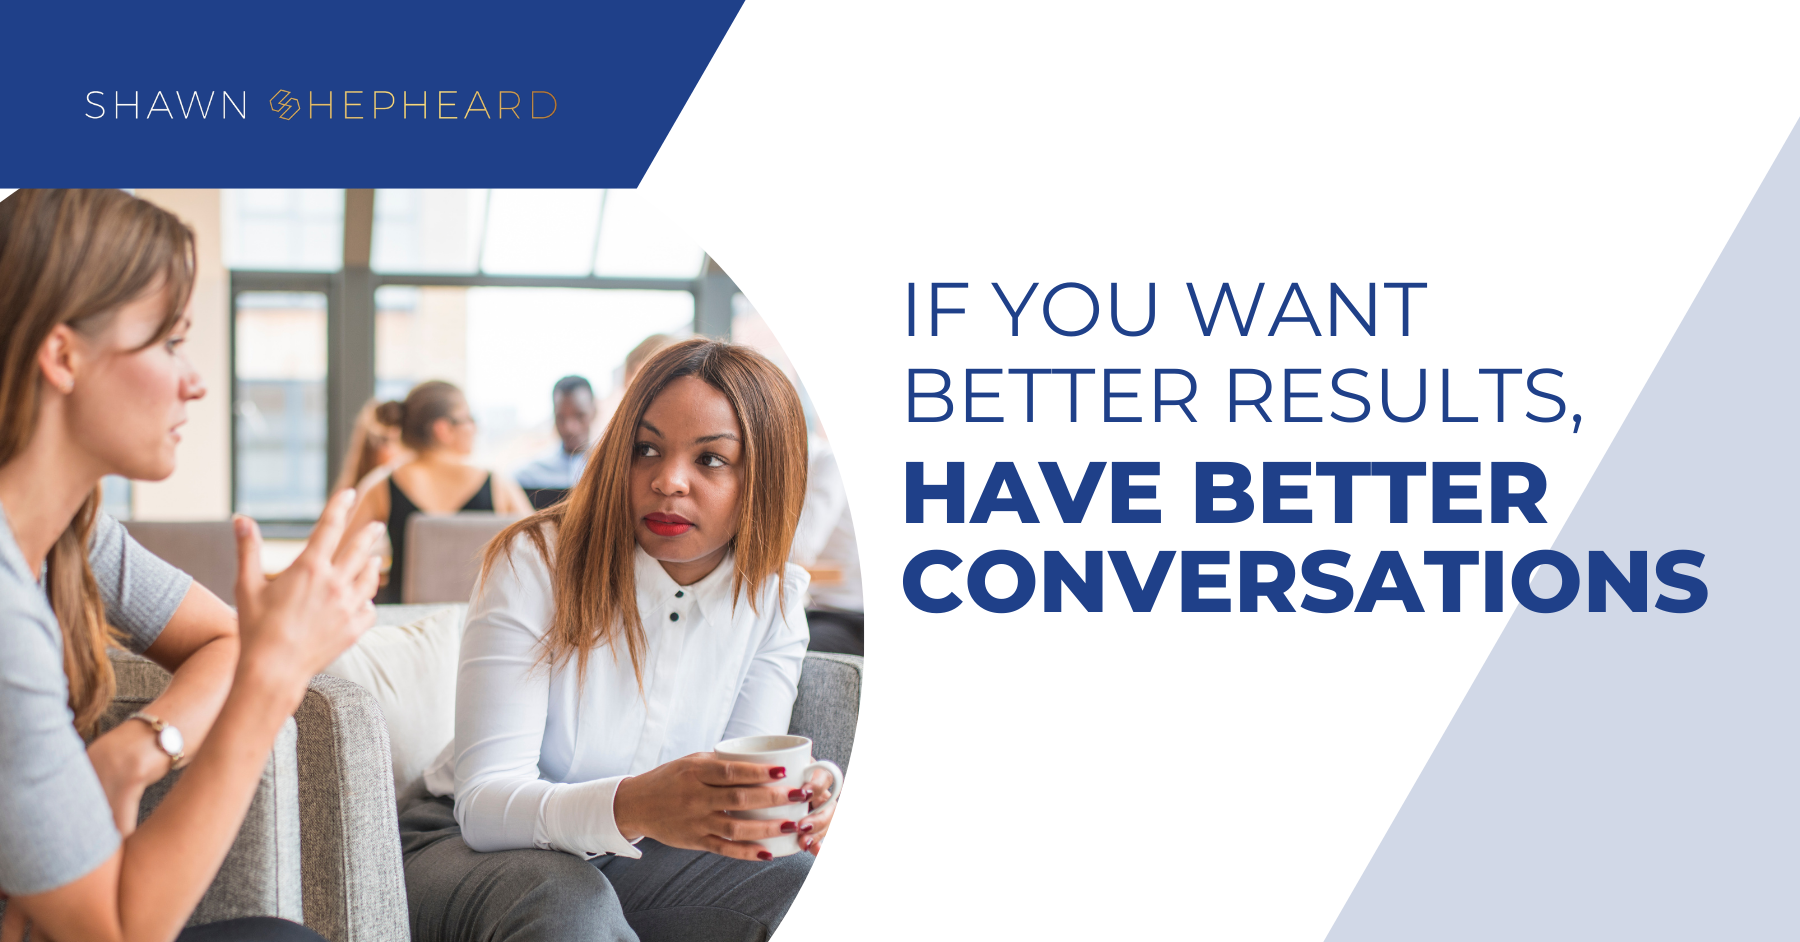 If you want better results, have better conversations